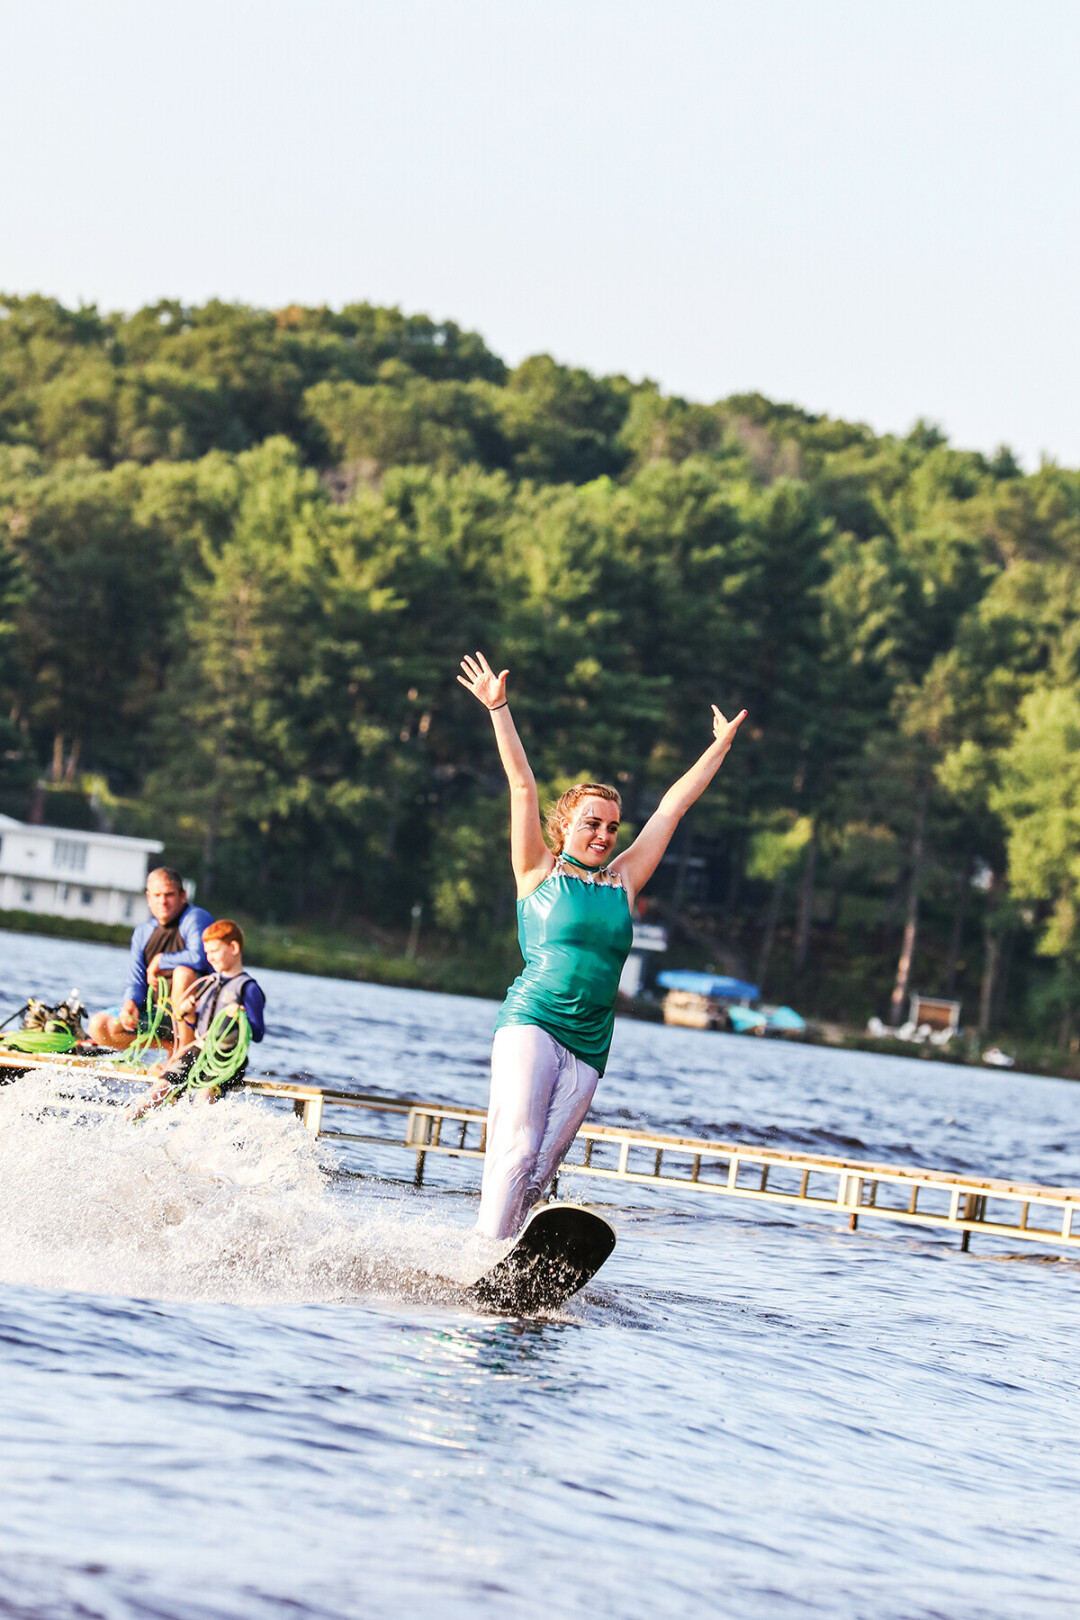 TA DA! THEY'RE BACK! The Ski Sprites Water Ski Team are back on Lake Altoona after a year without shows because of you-know-what.